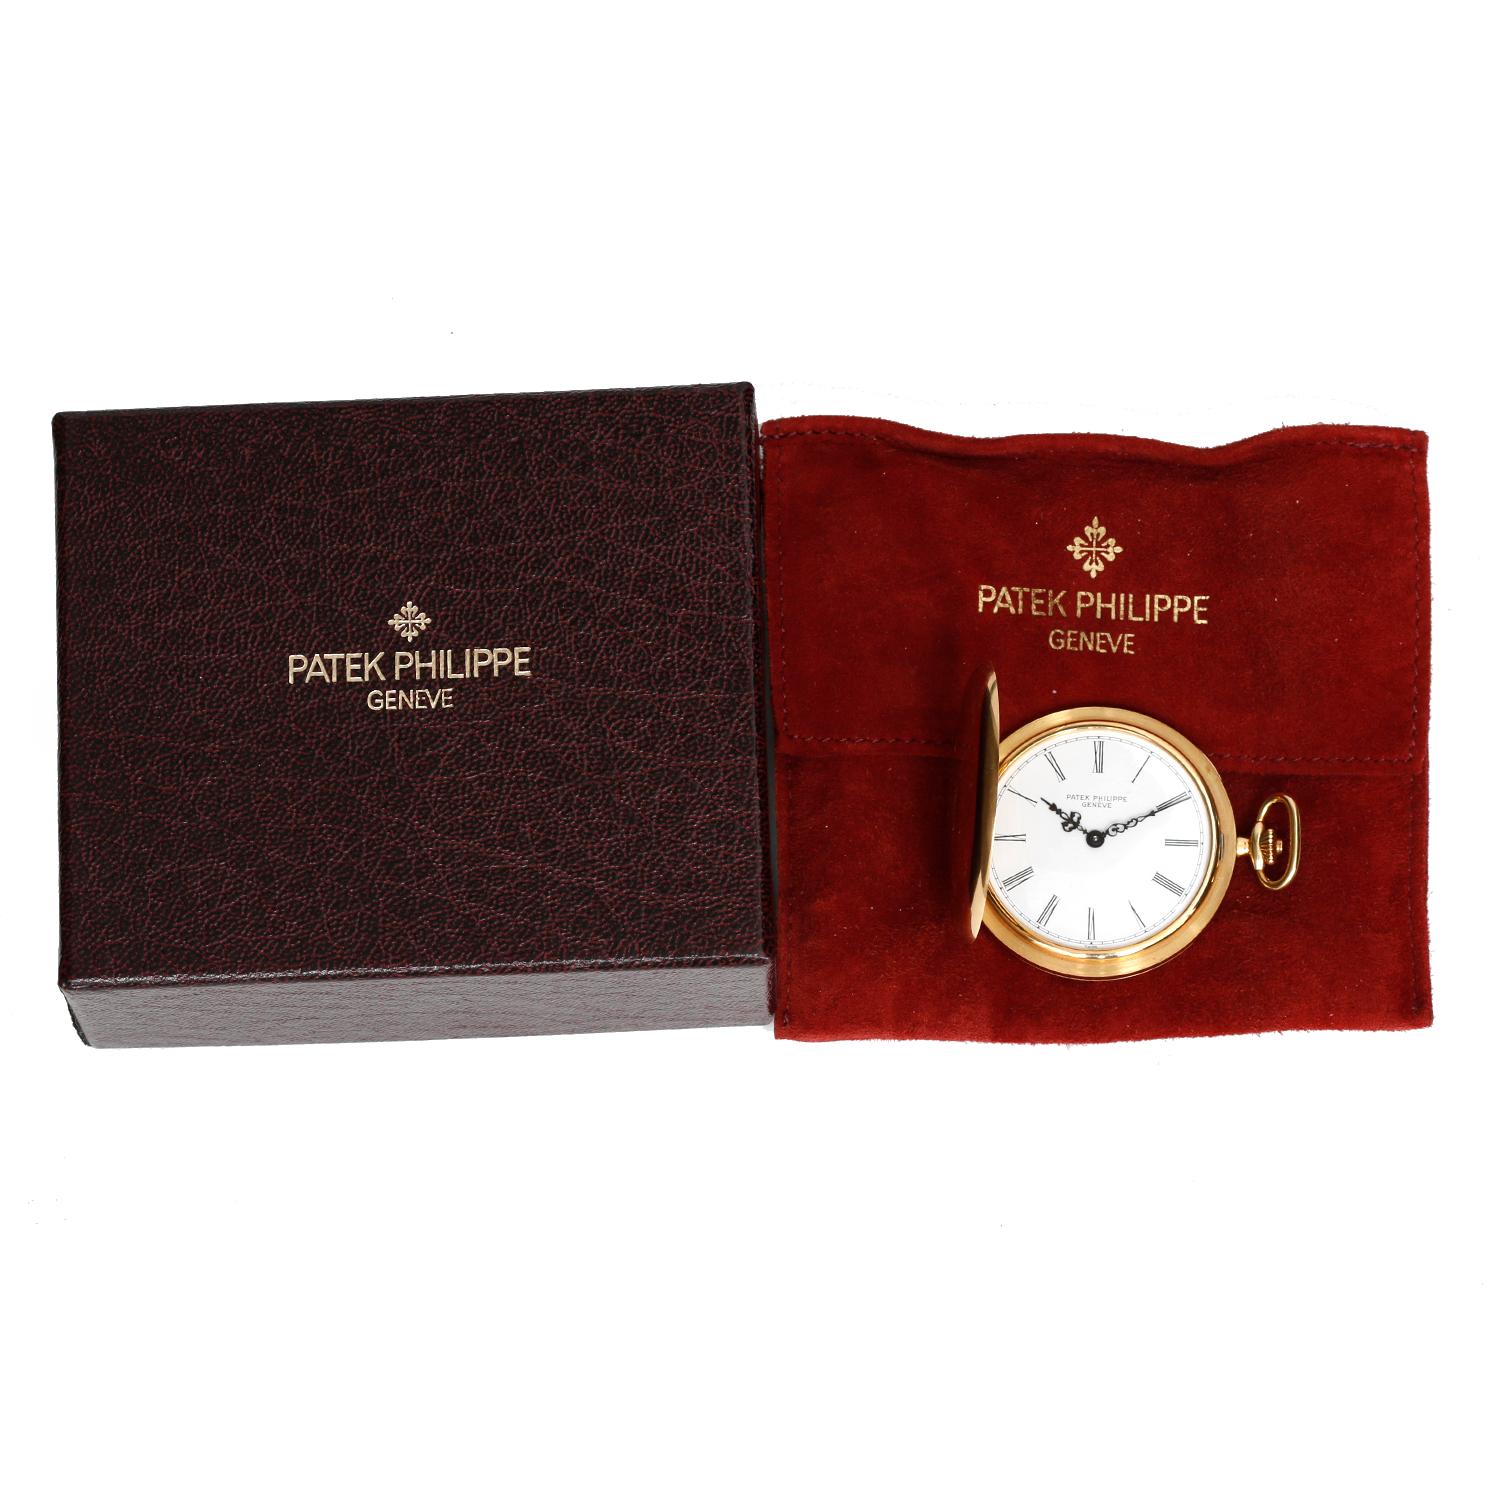 Patek Philippe & Co. 18K Yellow gold Hunter Case Pocket Watch Ref 865 - Manual movement; 18 jewels. 18K Yellow gold (47 mm ). White dial with Roman numerals with fancy filigree hands. Pre-owned Patek Philippe & Co. with archive papers on order. 